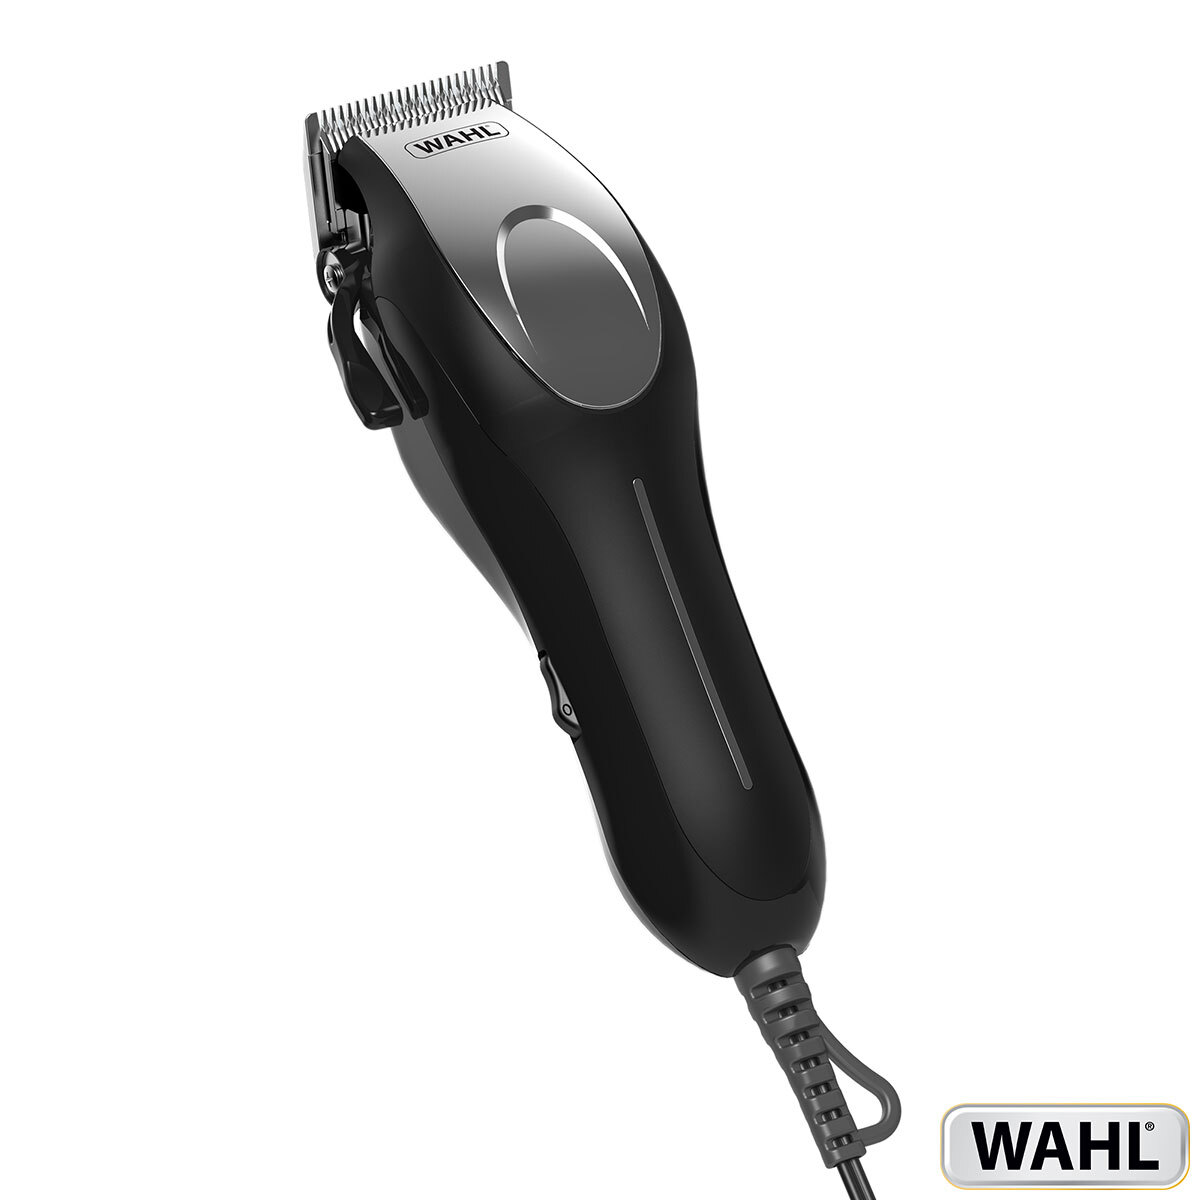 costco hair clippers wahl